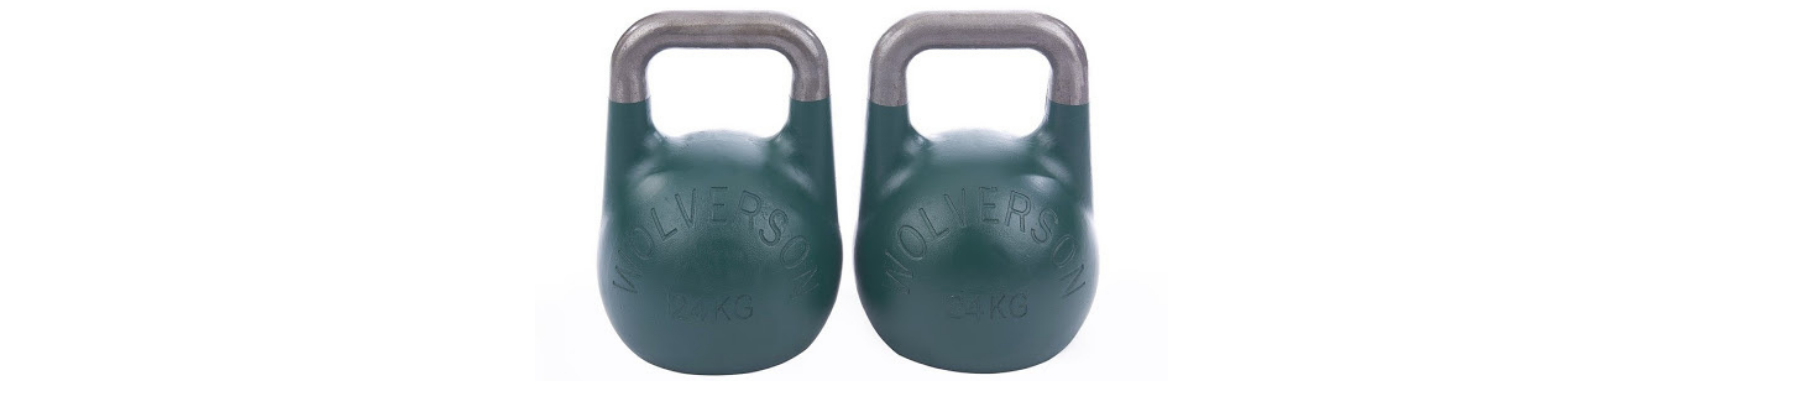 Hardstyle Kettlebell Training and Girevoy Sport – What is the difference?